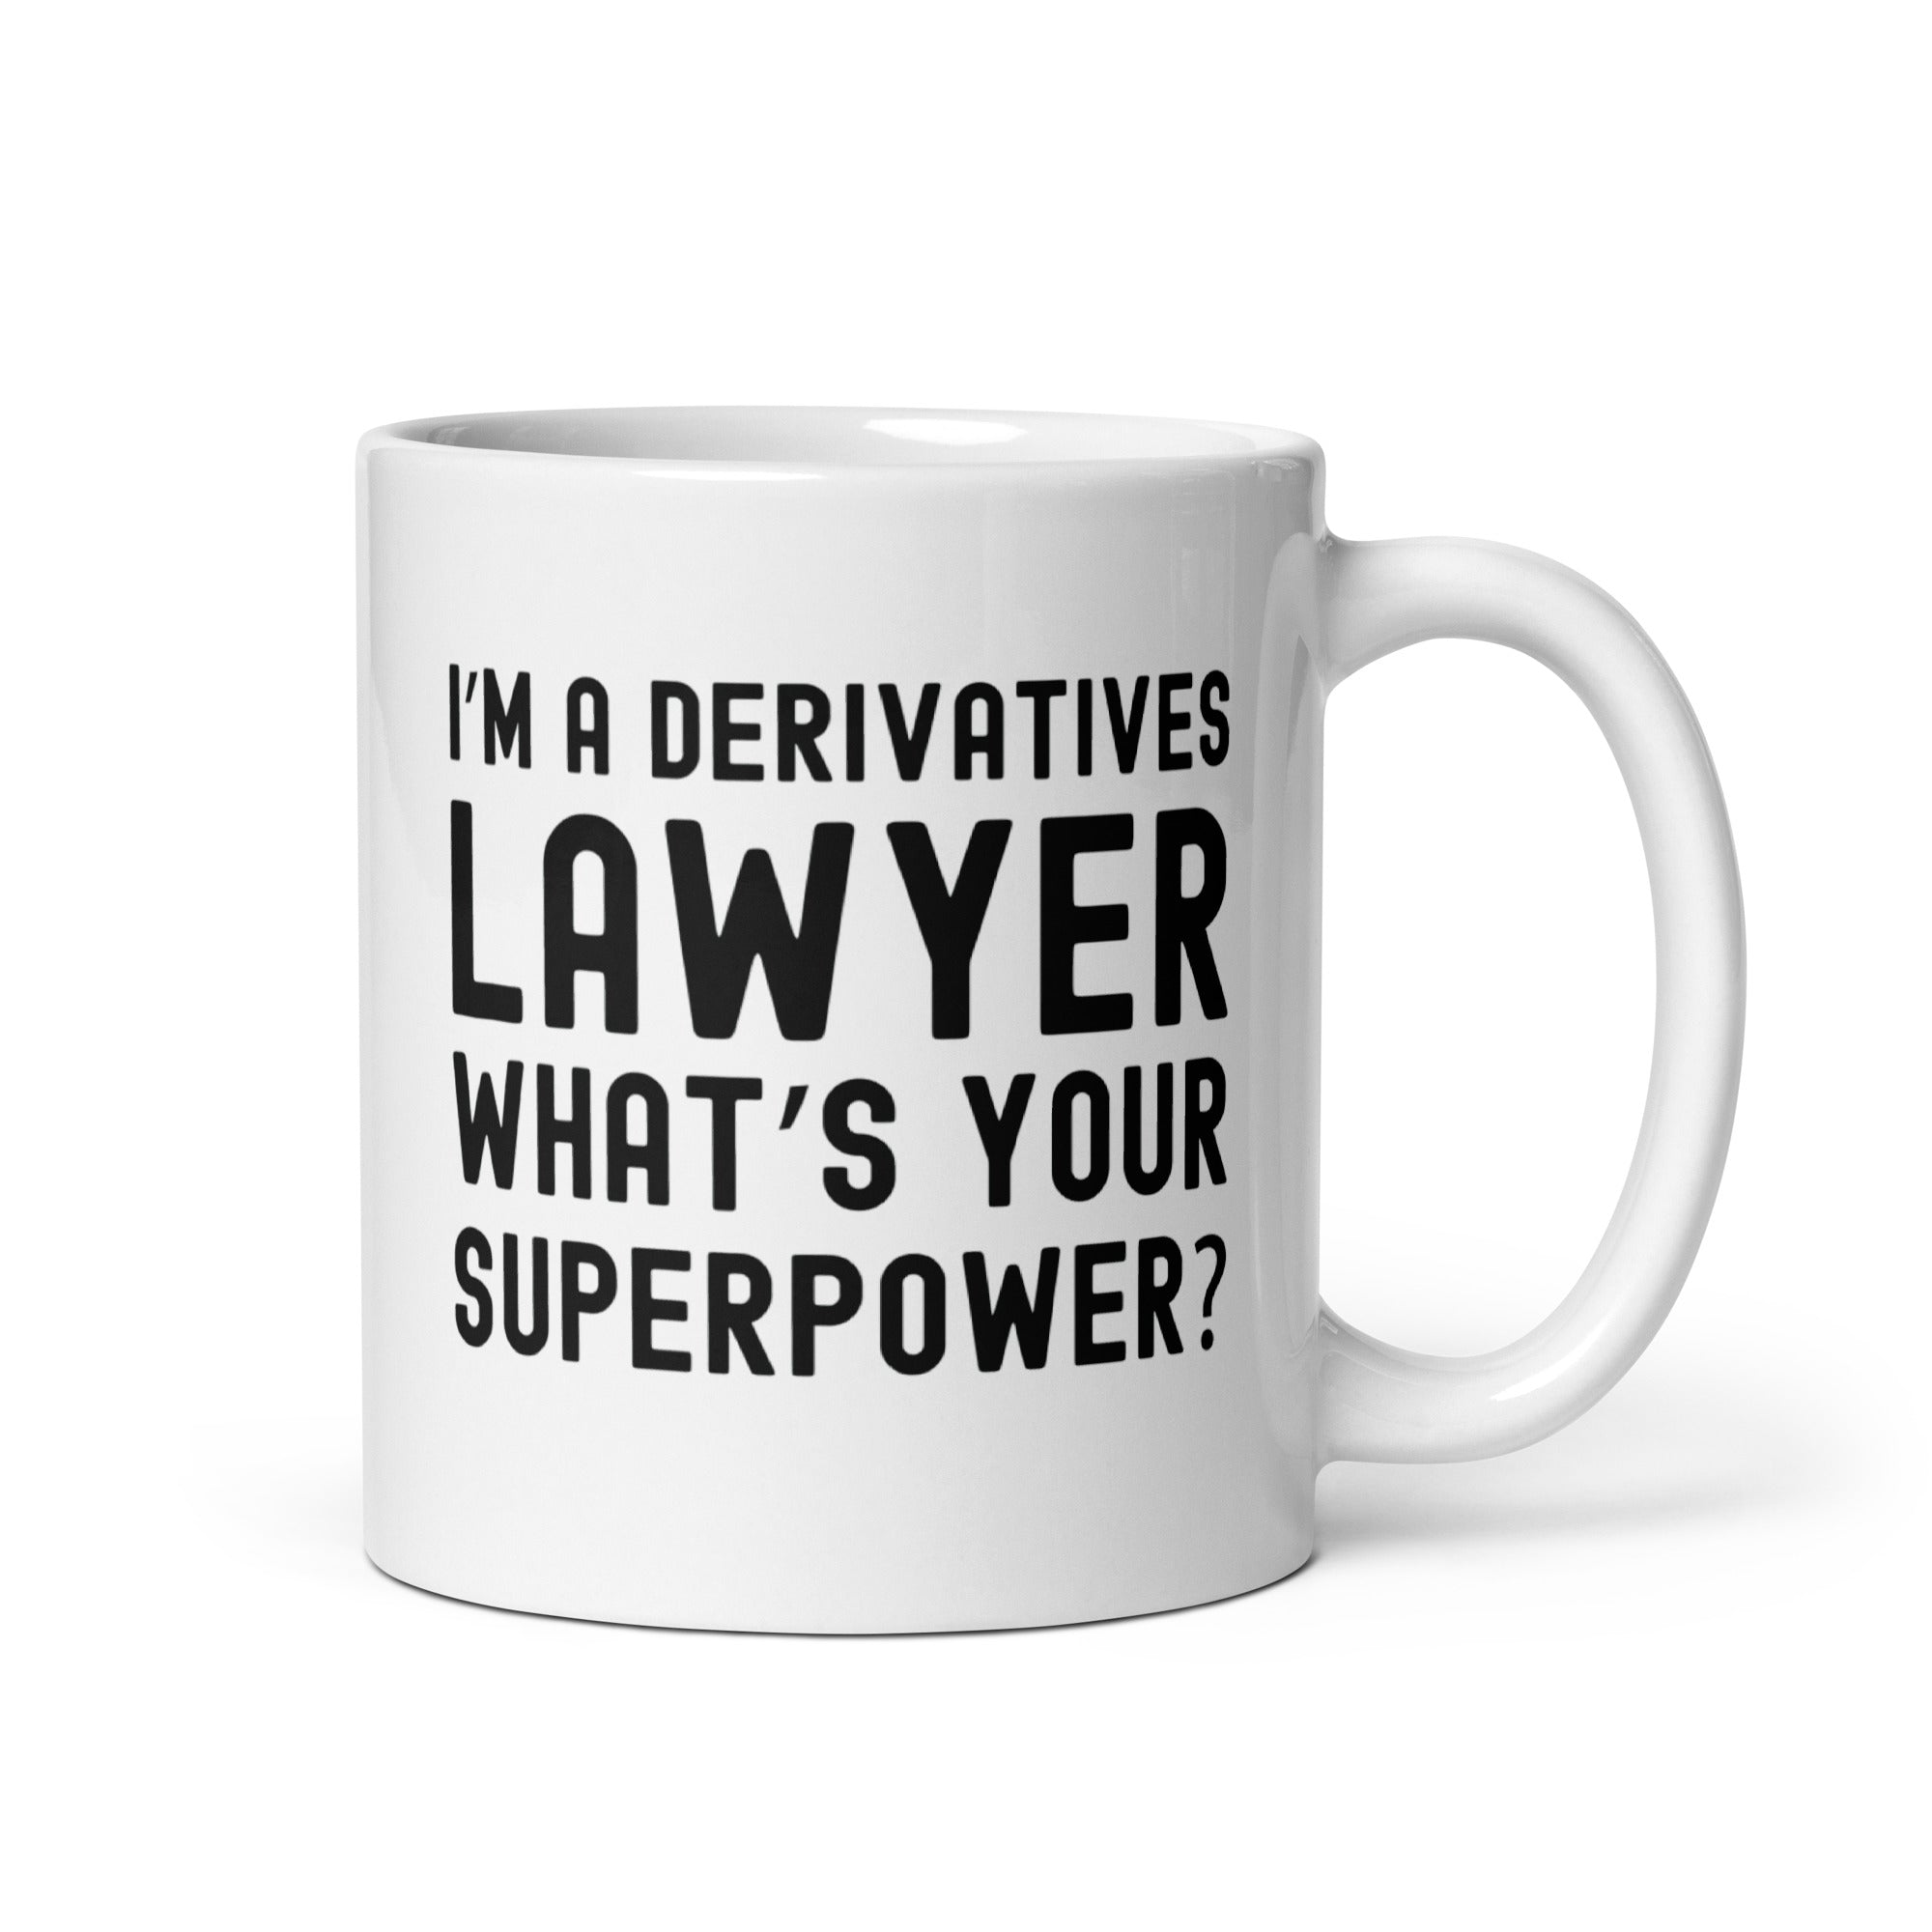 White glossy mug | I’m a derivatives lawyer, what’s your superpower?